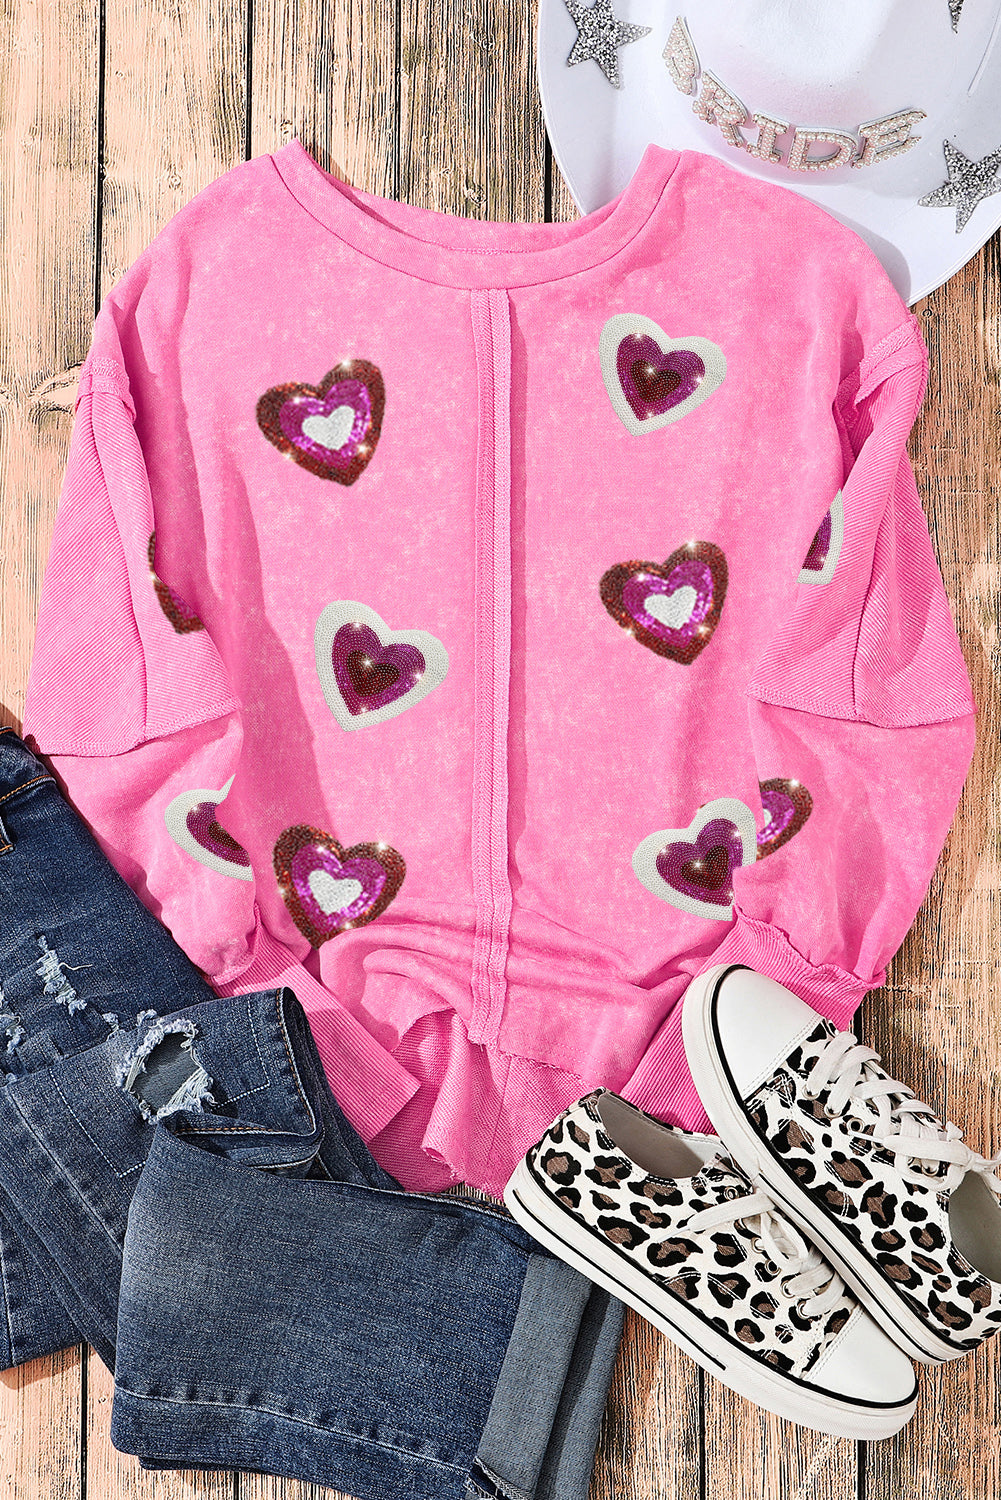 Rose Sequin Heart Shaped Exposed Seam Pullover Sweatshirt, valentines sweatshirt, all over heart top, casual top